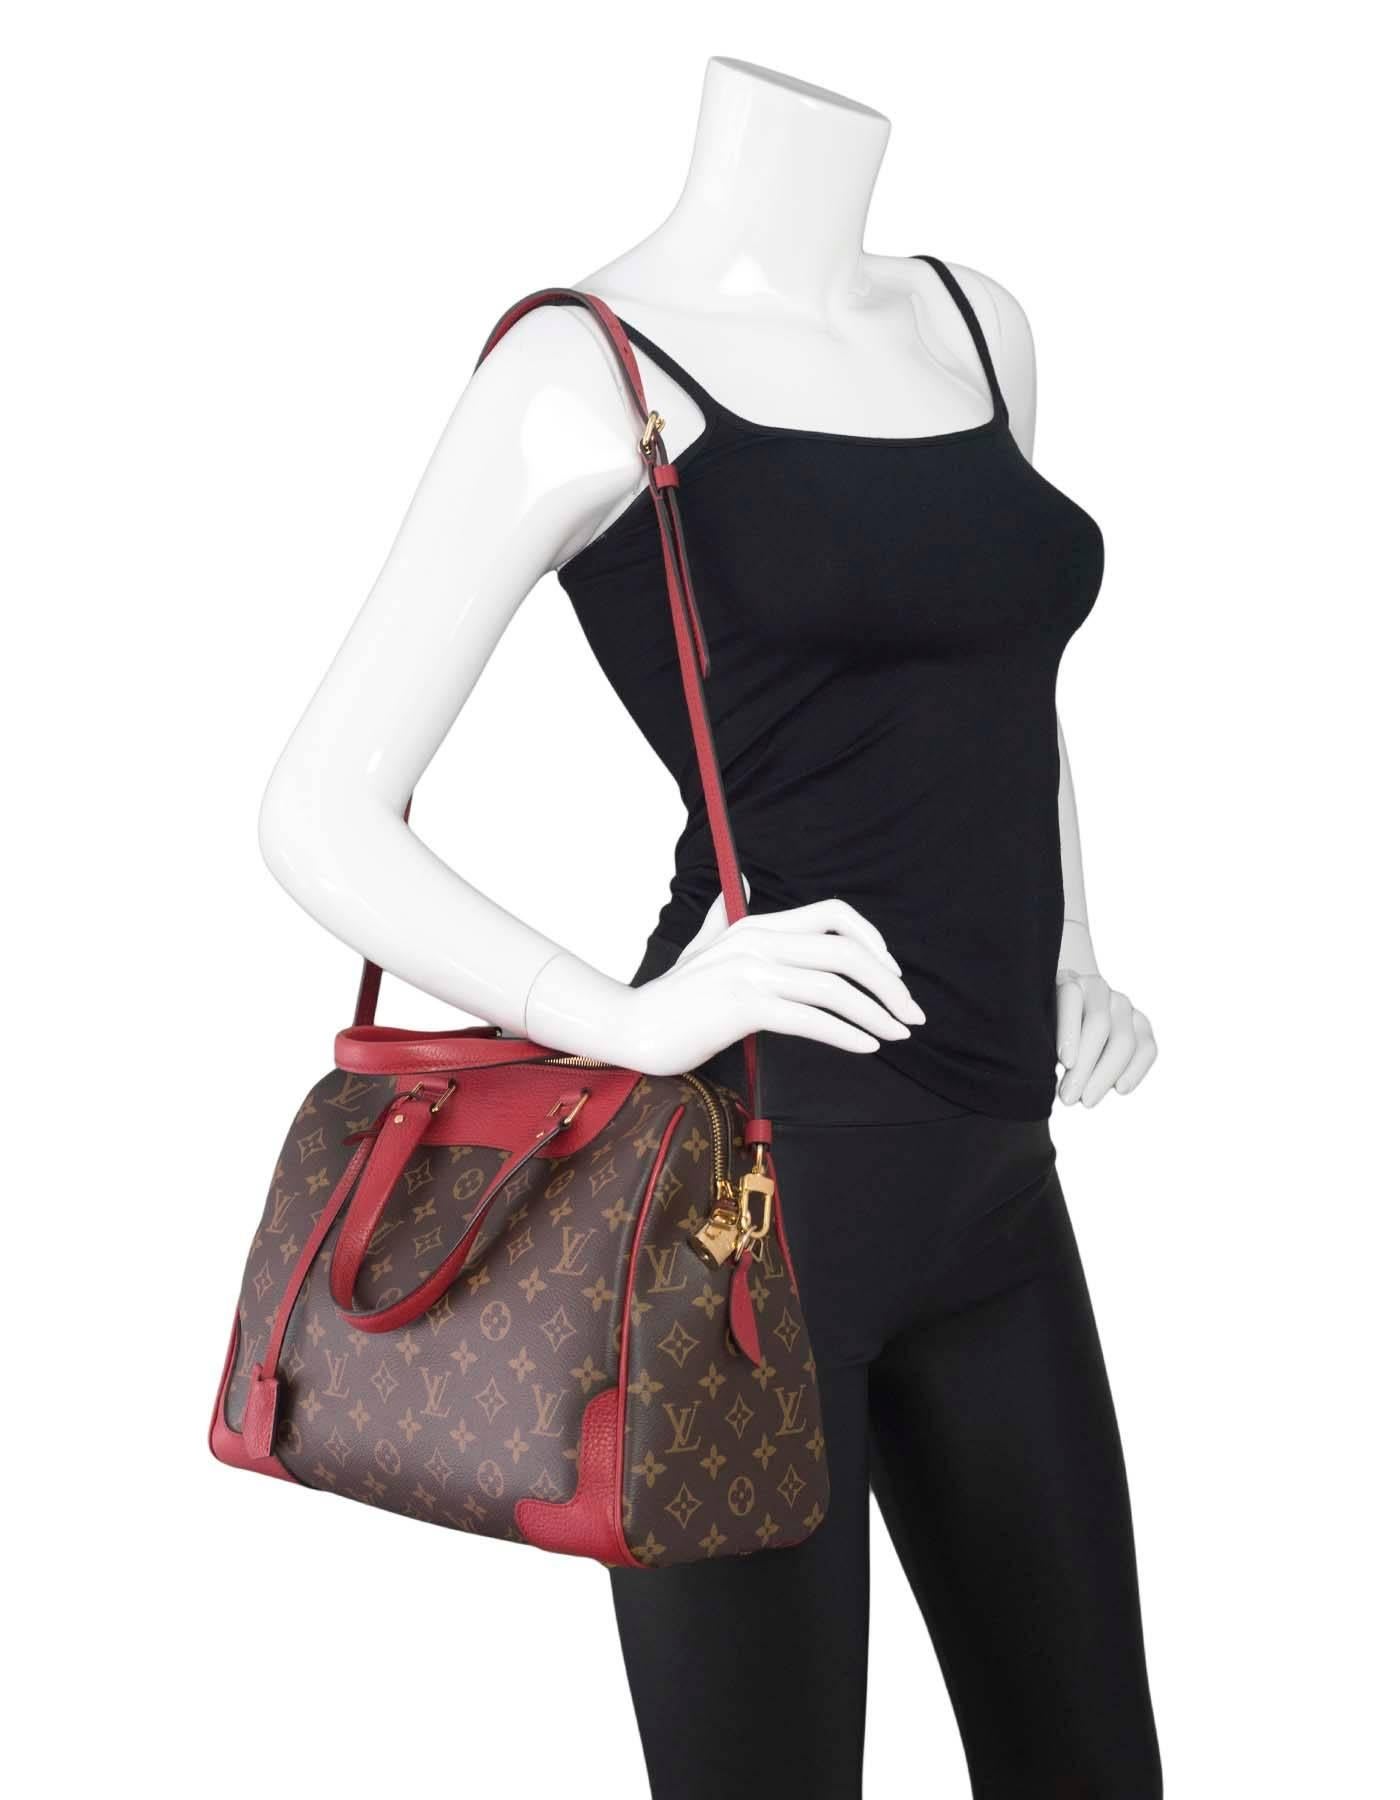 Louis Vuitton Monogram & Cerise Retiro Bag
Features monogram coated canvas and cerise red leather

Made In: France
Year of Production: 2015
Color: Brown, red
Hardware: Goldtone
Materials: Coated canvas, cowhide leather
Lining: Red